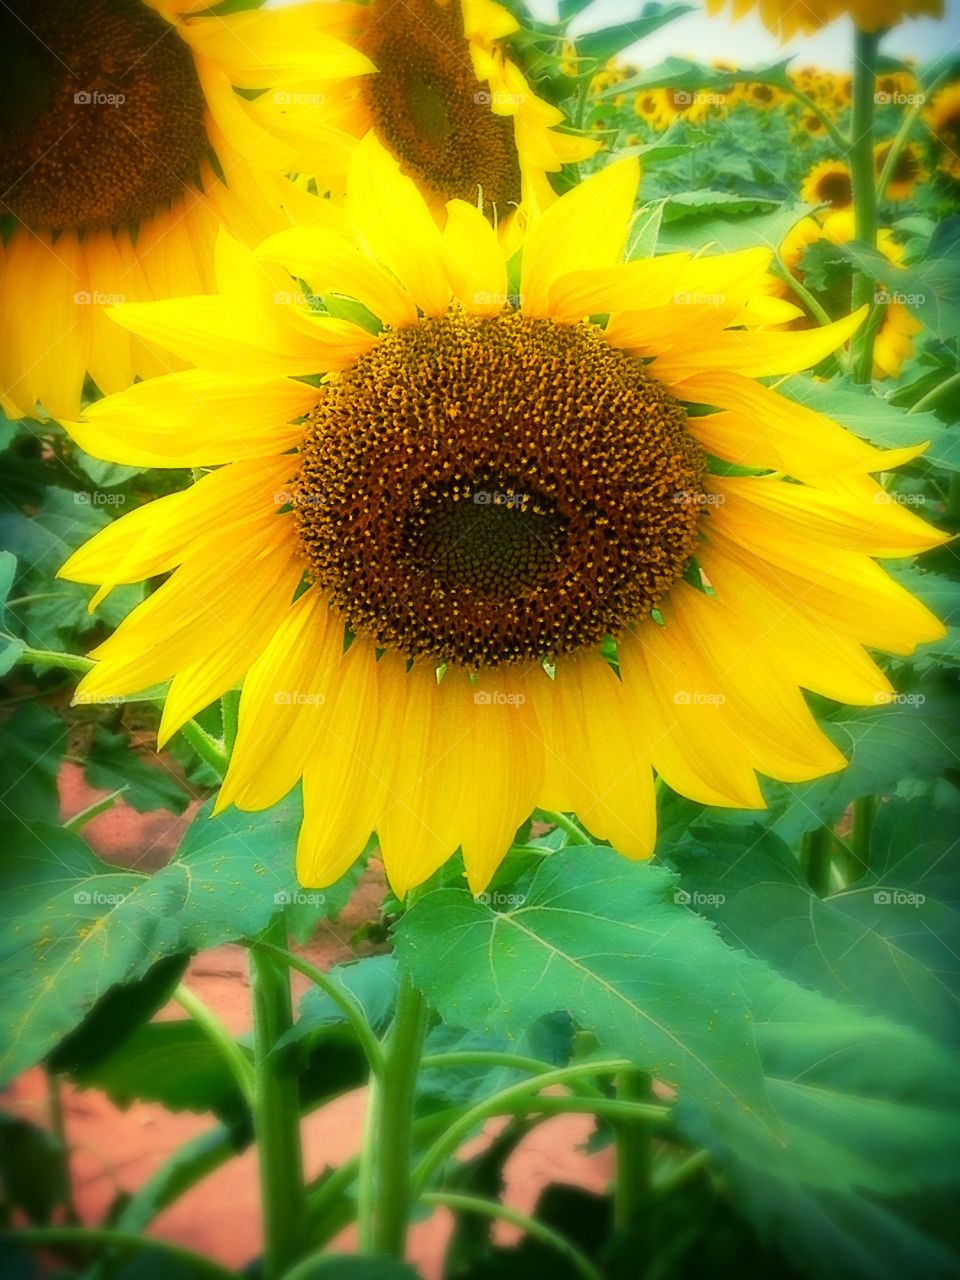 Up close and personal . I love to look at sunflowers even up close. Breath taking 